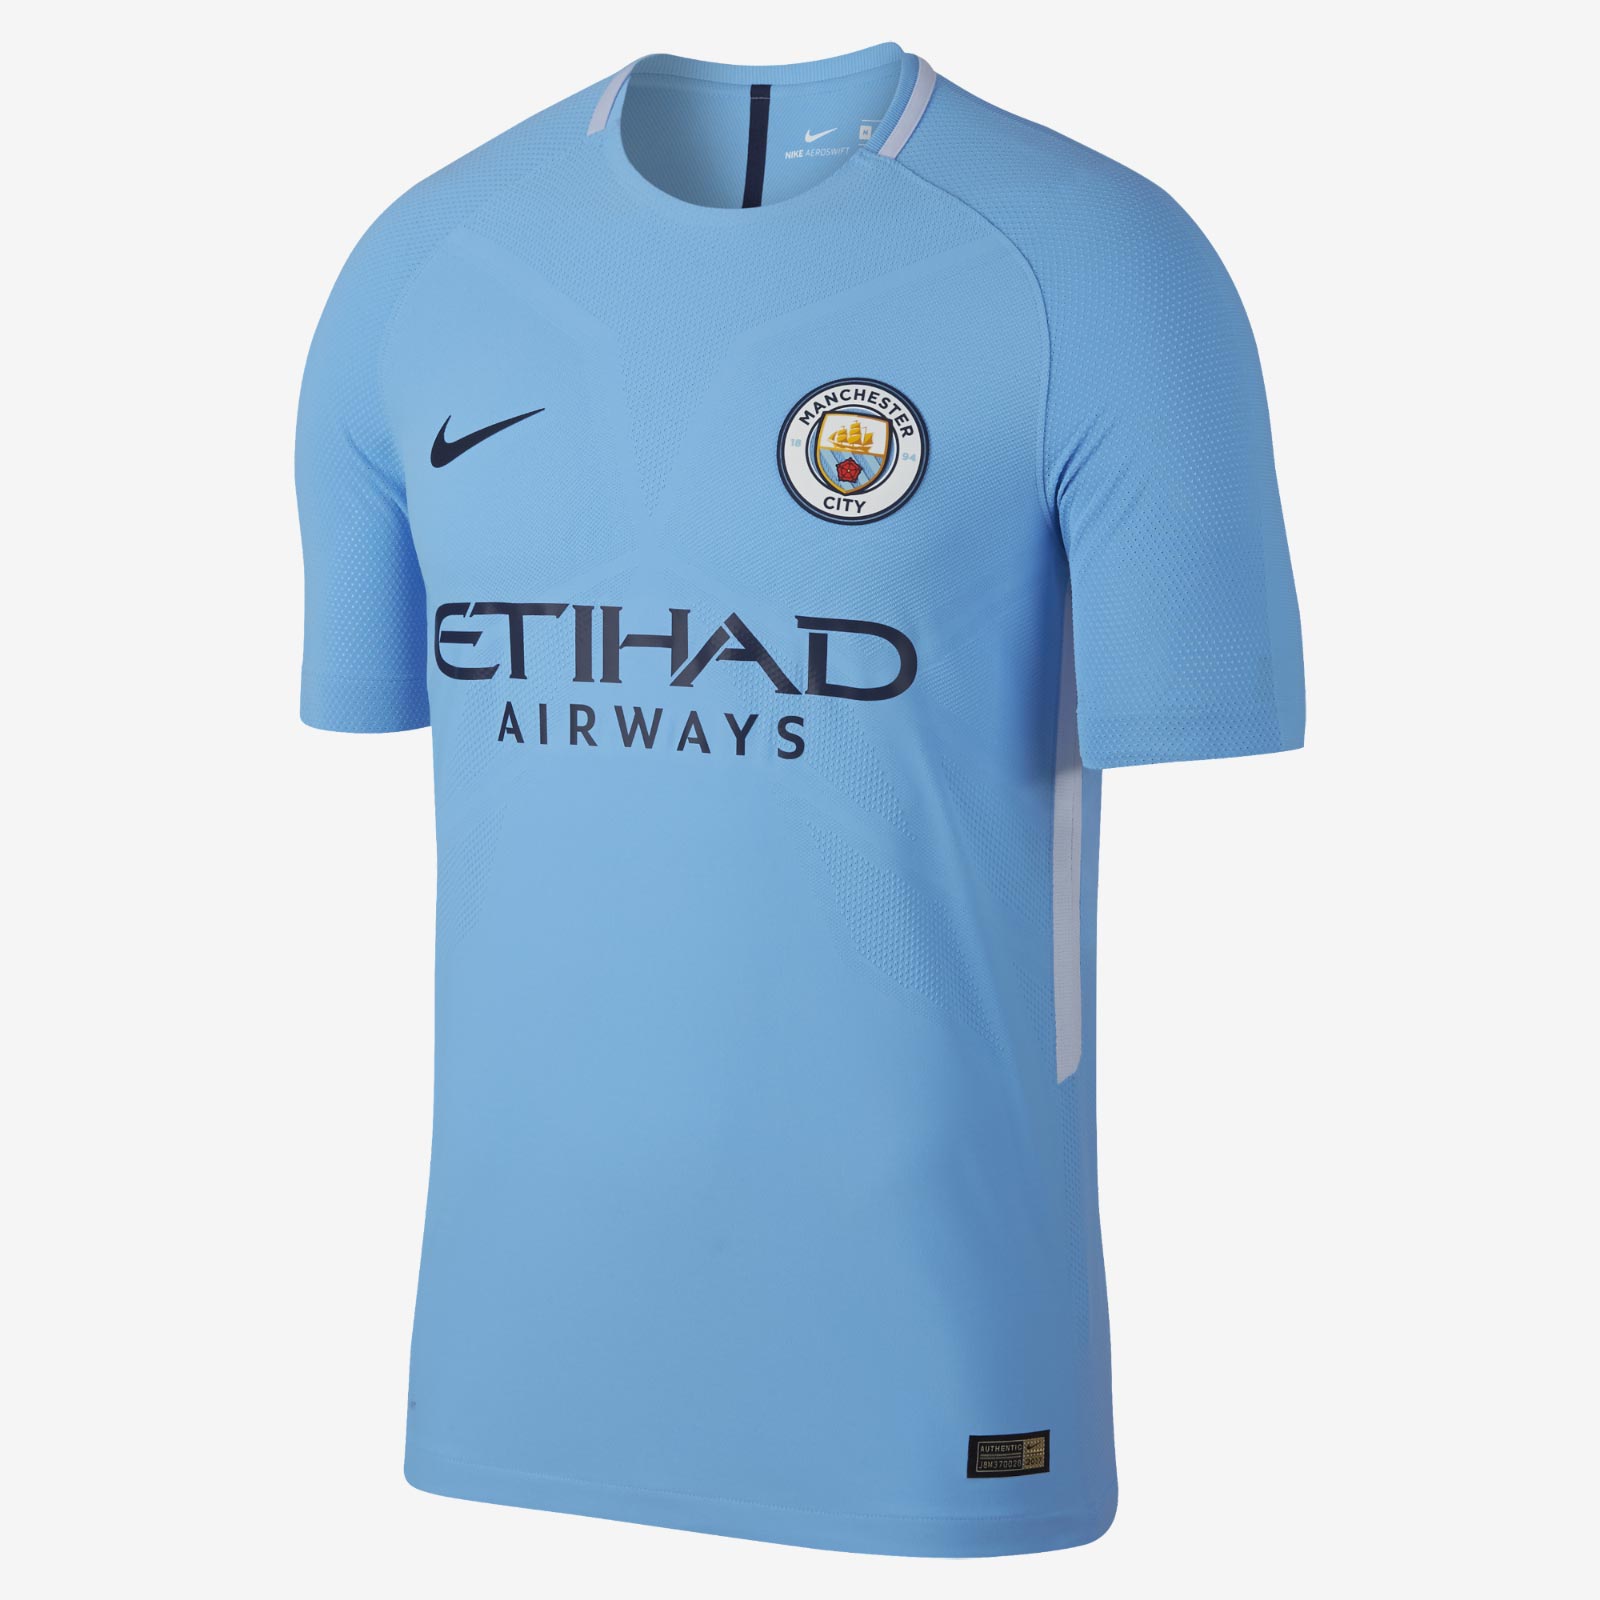 Manchester City Home Kit Released - Footy Headlines